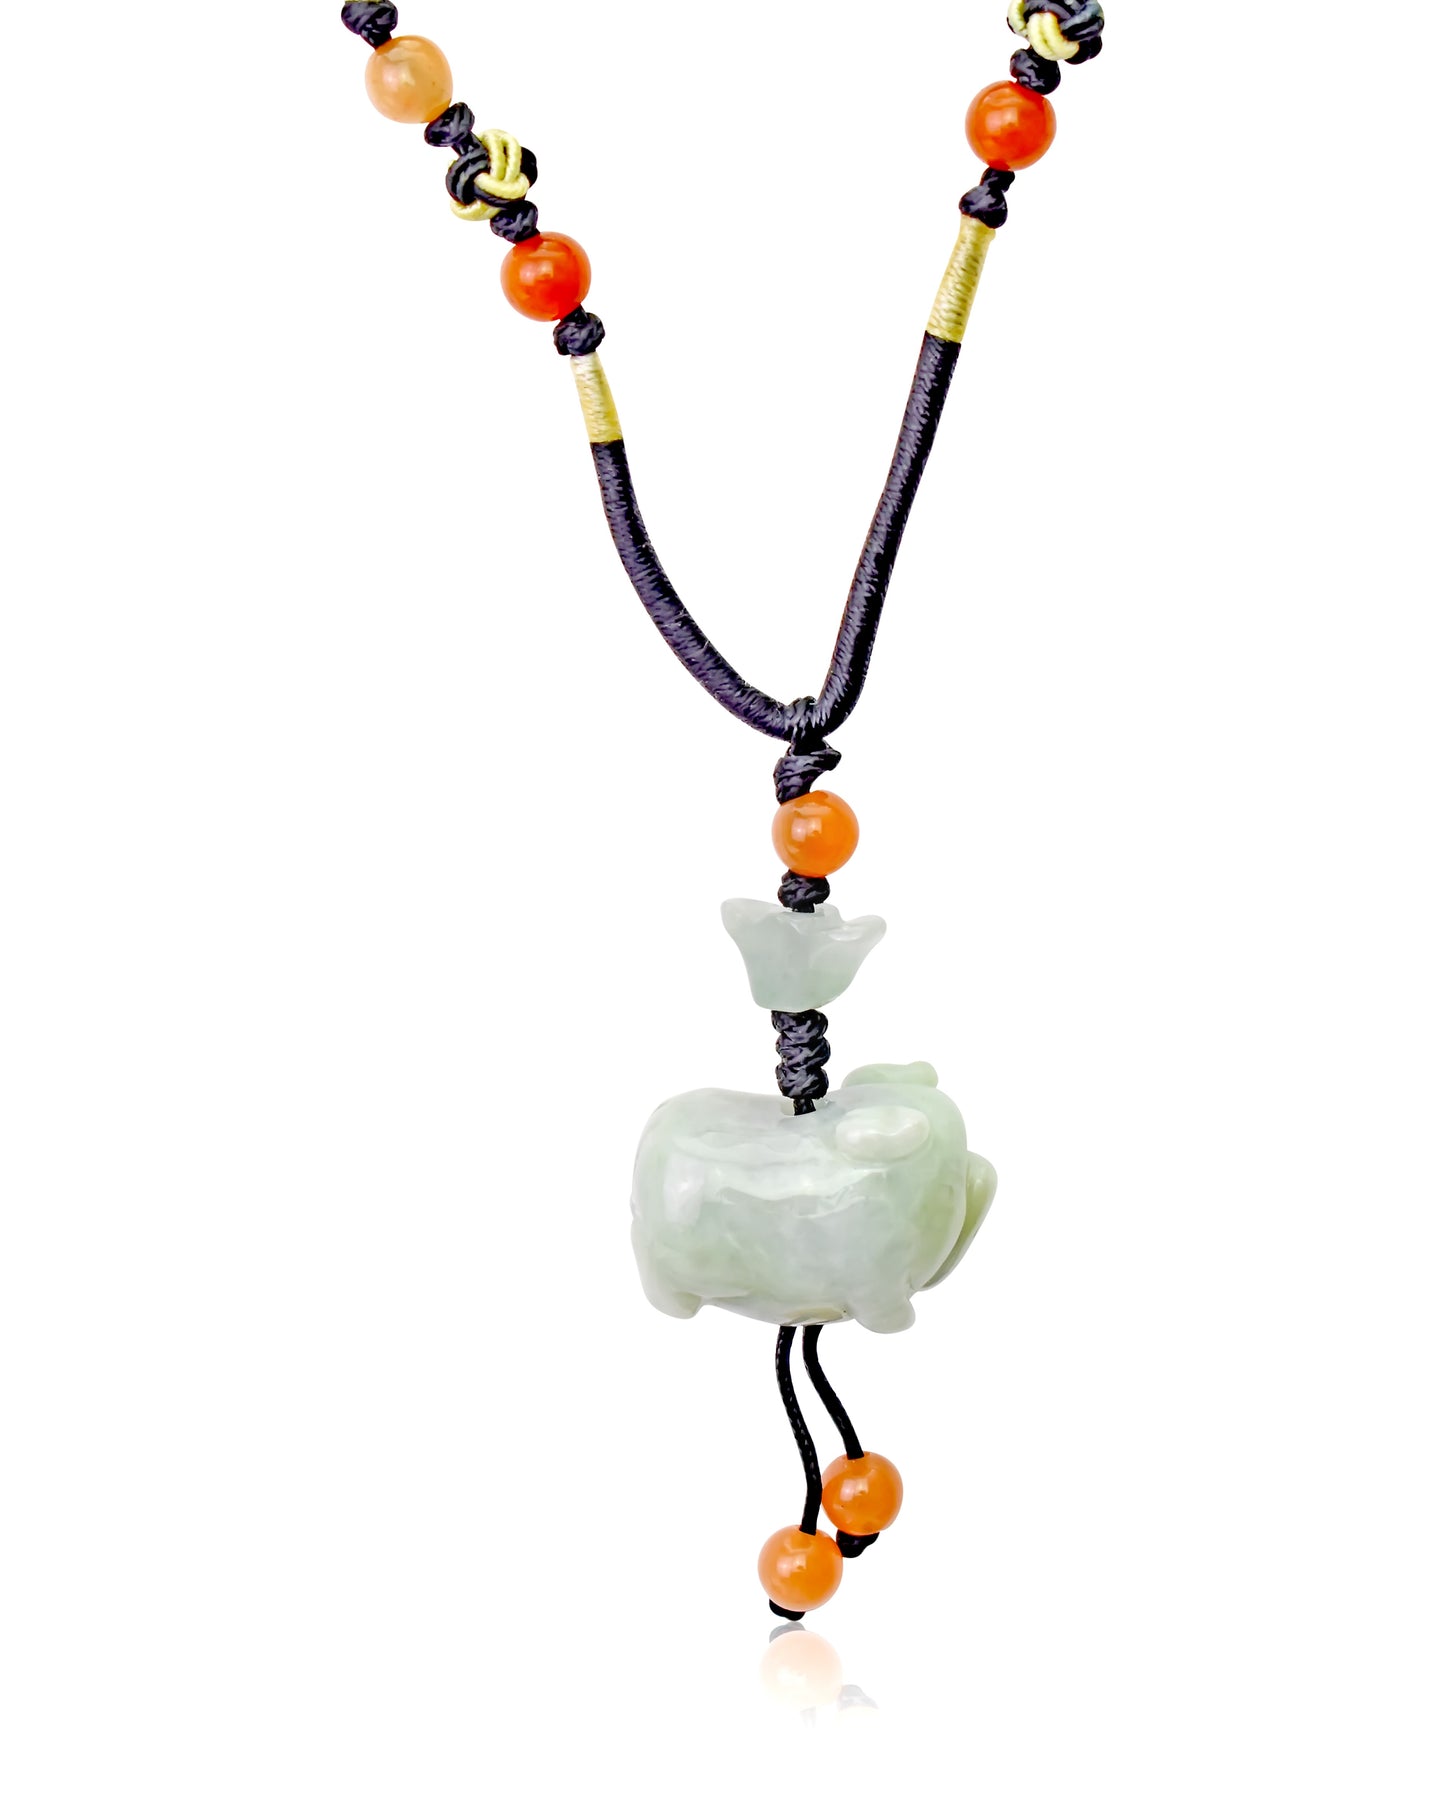 Wear your Boar Chinese Zodiac Proudly with a Handmade Jade Necklace